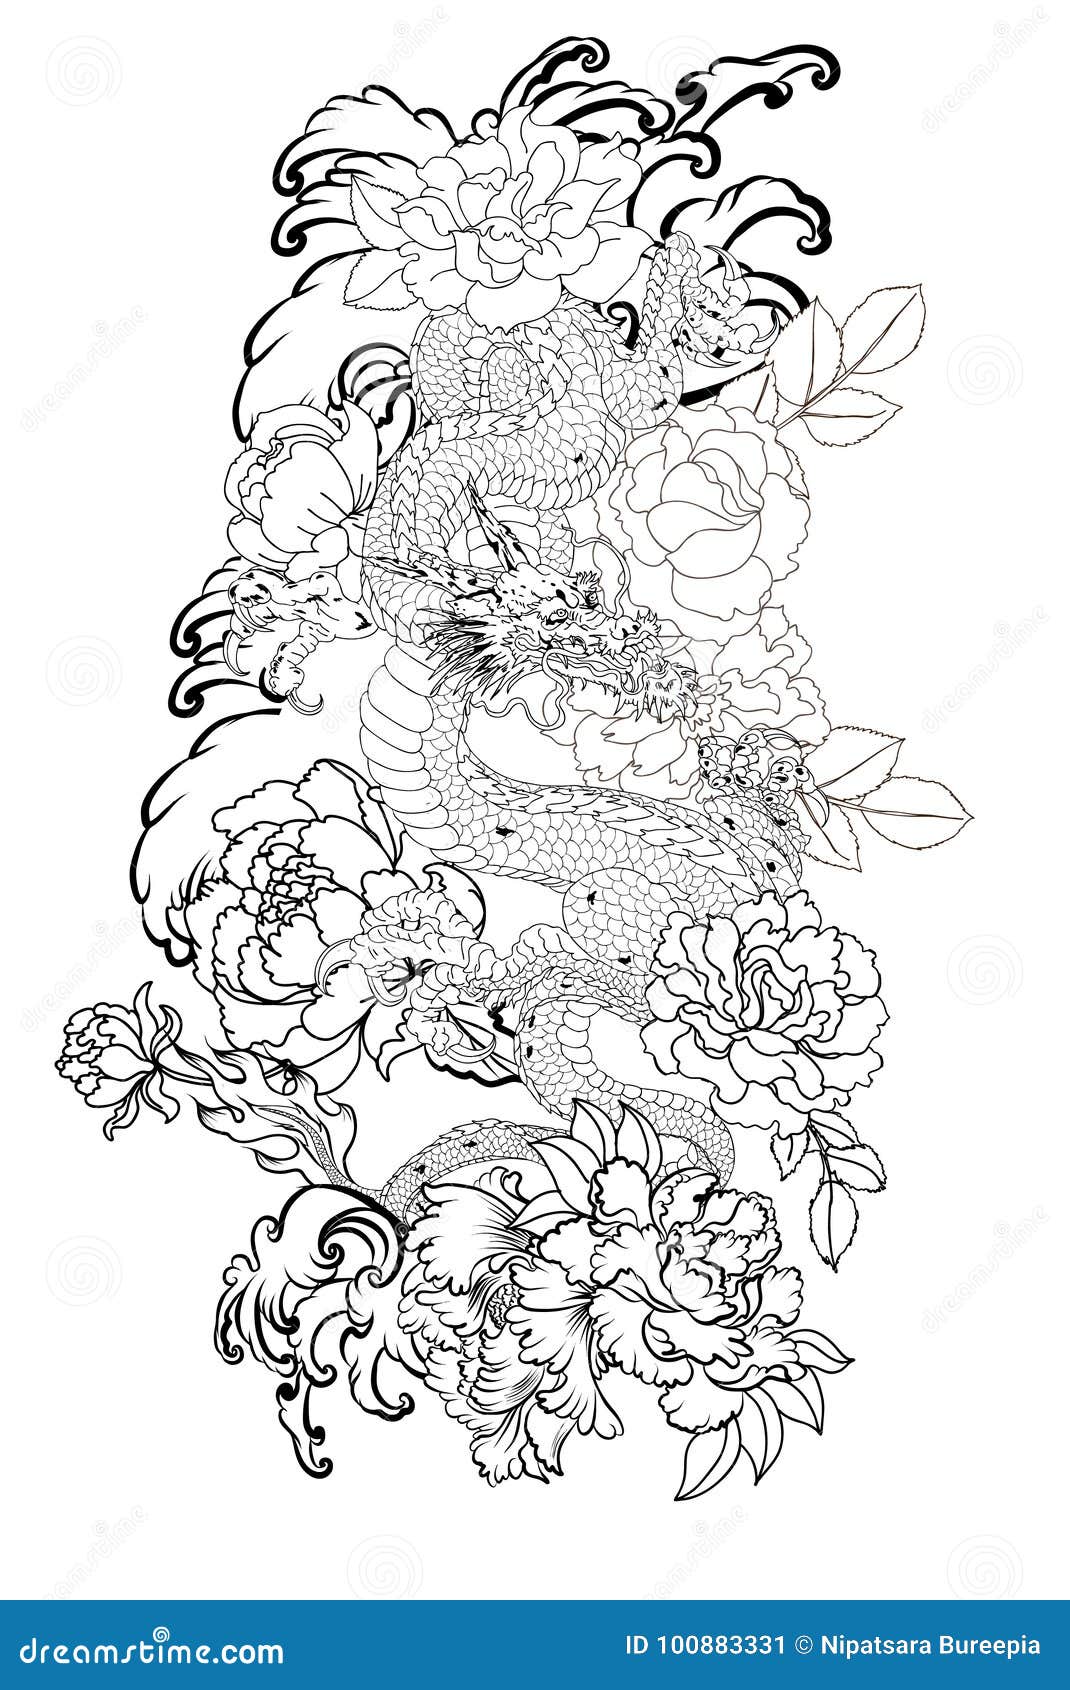 Japanese Old Dragon Tattoo for ArmHand Drawn Dragon with Peony  Flowerlotusrose and Chrysanthemum Flower and Water Splash Stock Vector   Illustration of drawn beautiful 112017582